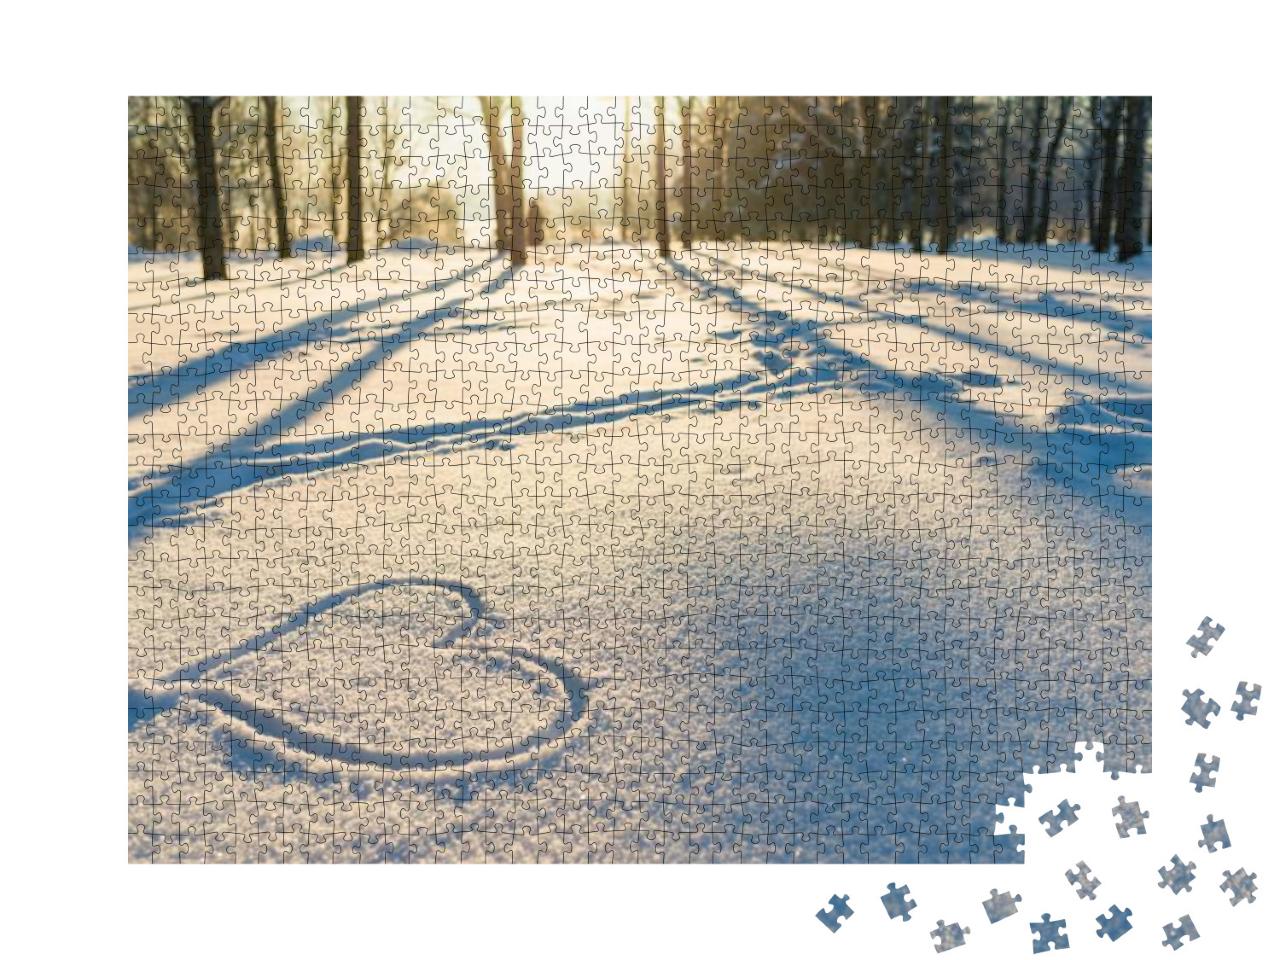 Drawn Heart in a Snow Landscape. Winter Evening Sunset Ni... Jigsaw Puzzle with 1000 pieces